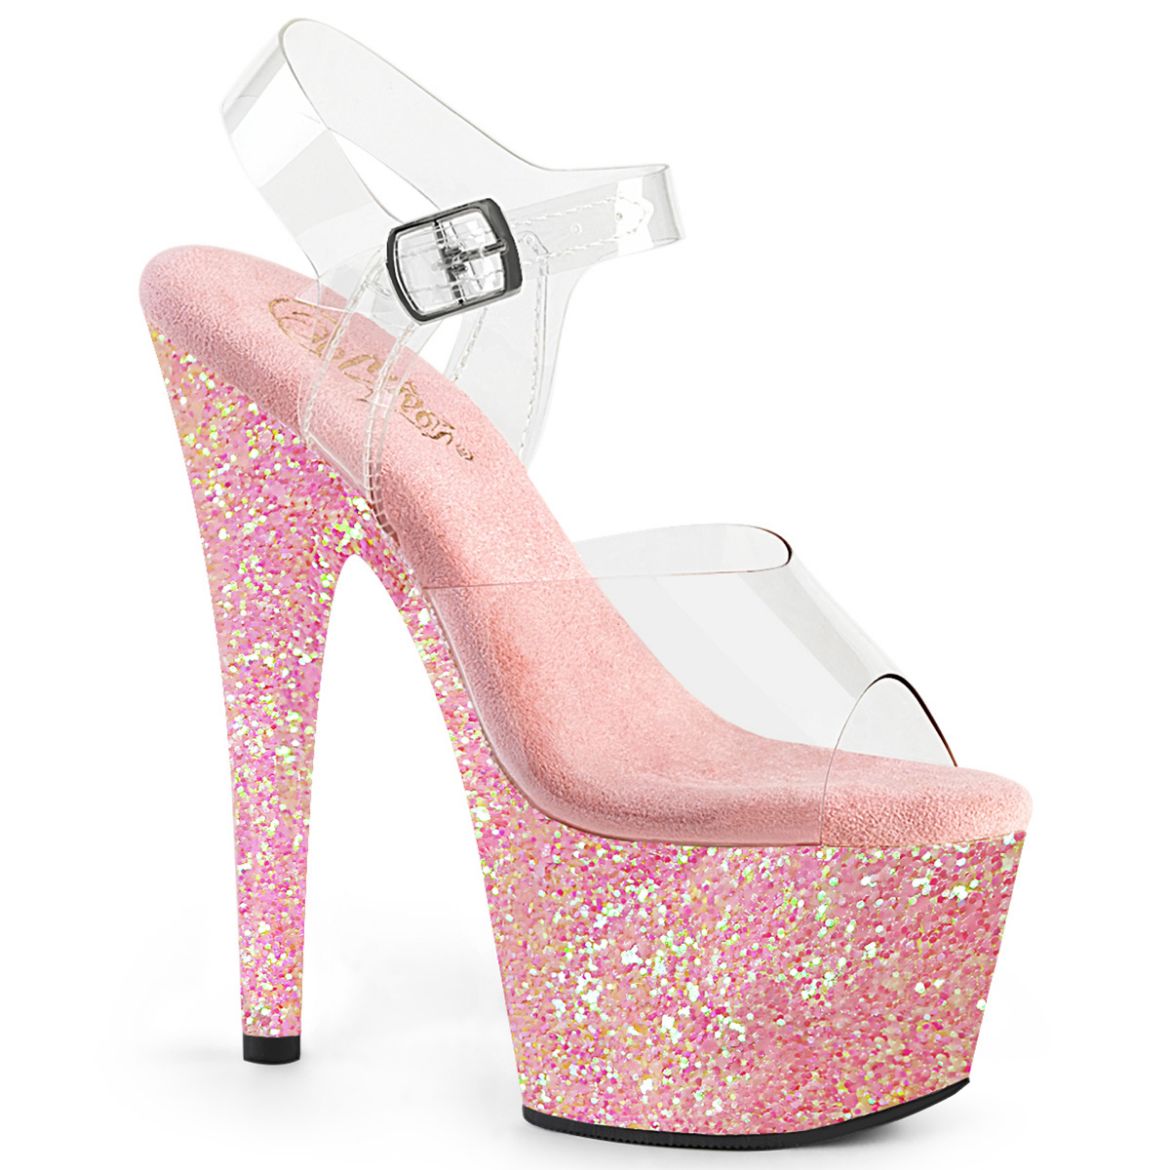 Product image of Pleaser ADORE-708LG Clear/Baby Pink Glitter 7 inch (17.8 cm) Heel 2 3/4 inch (7 cm) Platform Ankle Strap Sandal With Glitter Bottom Shoes